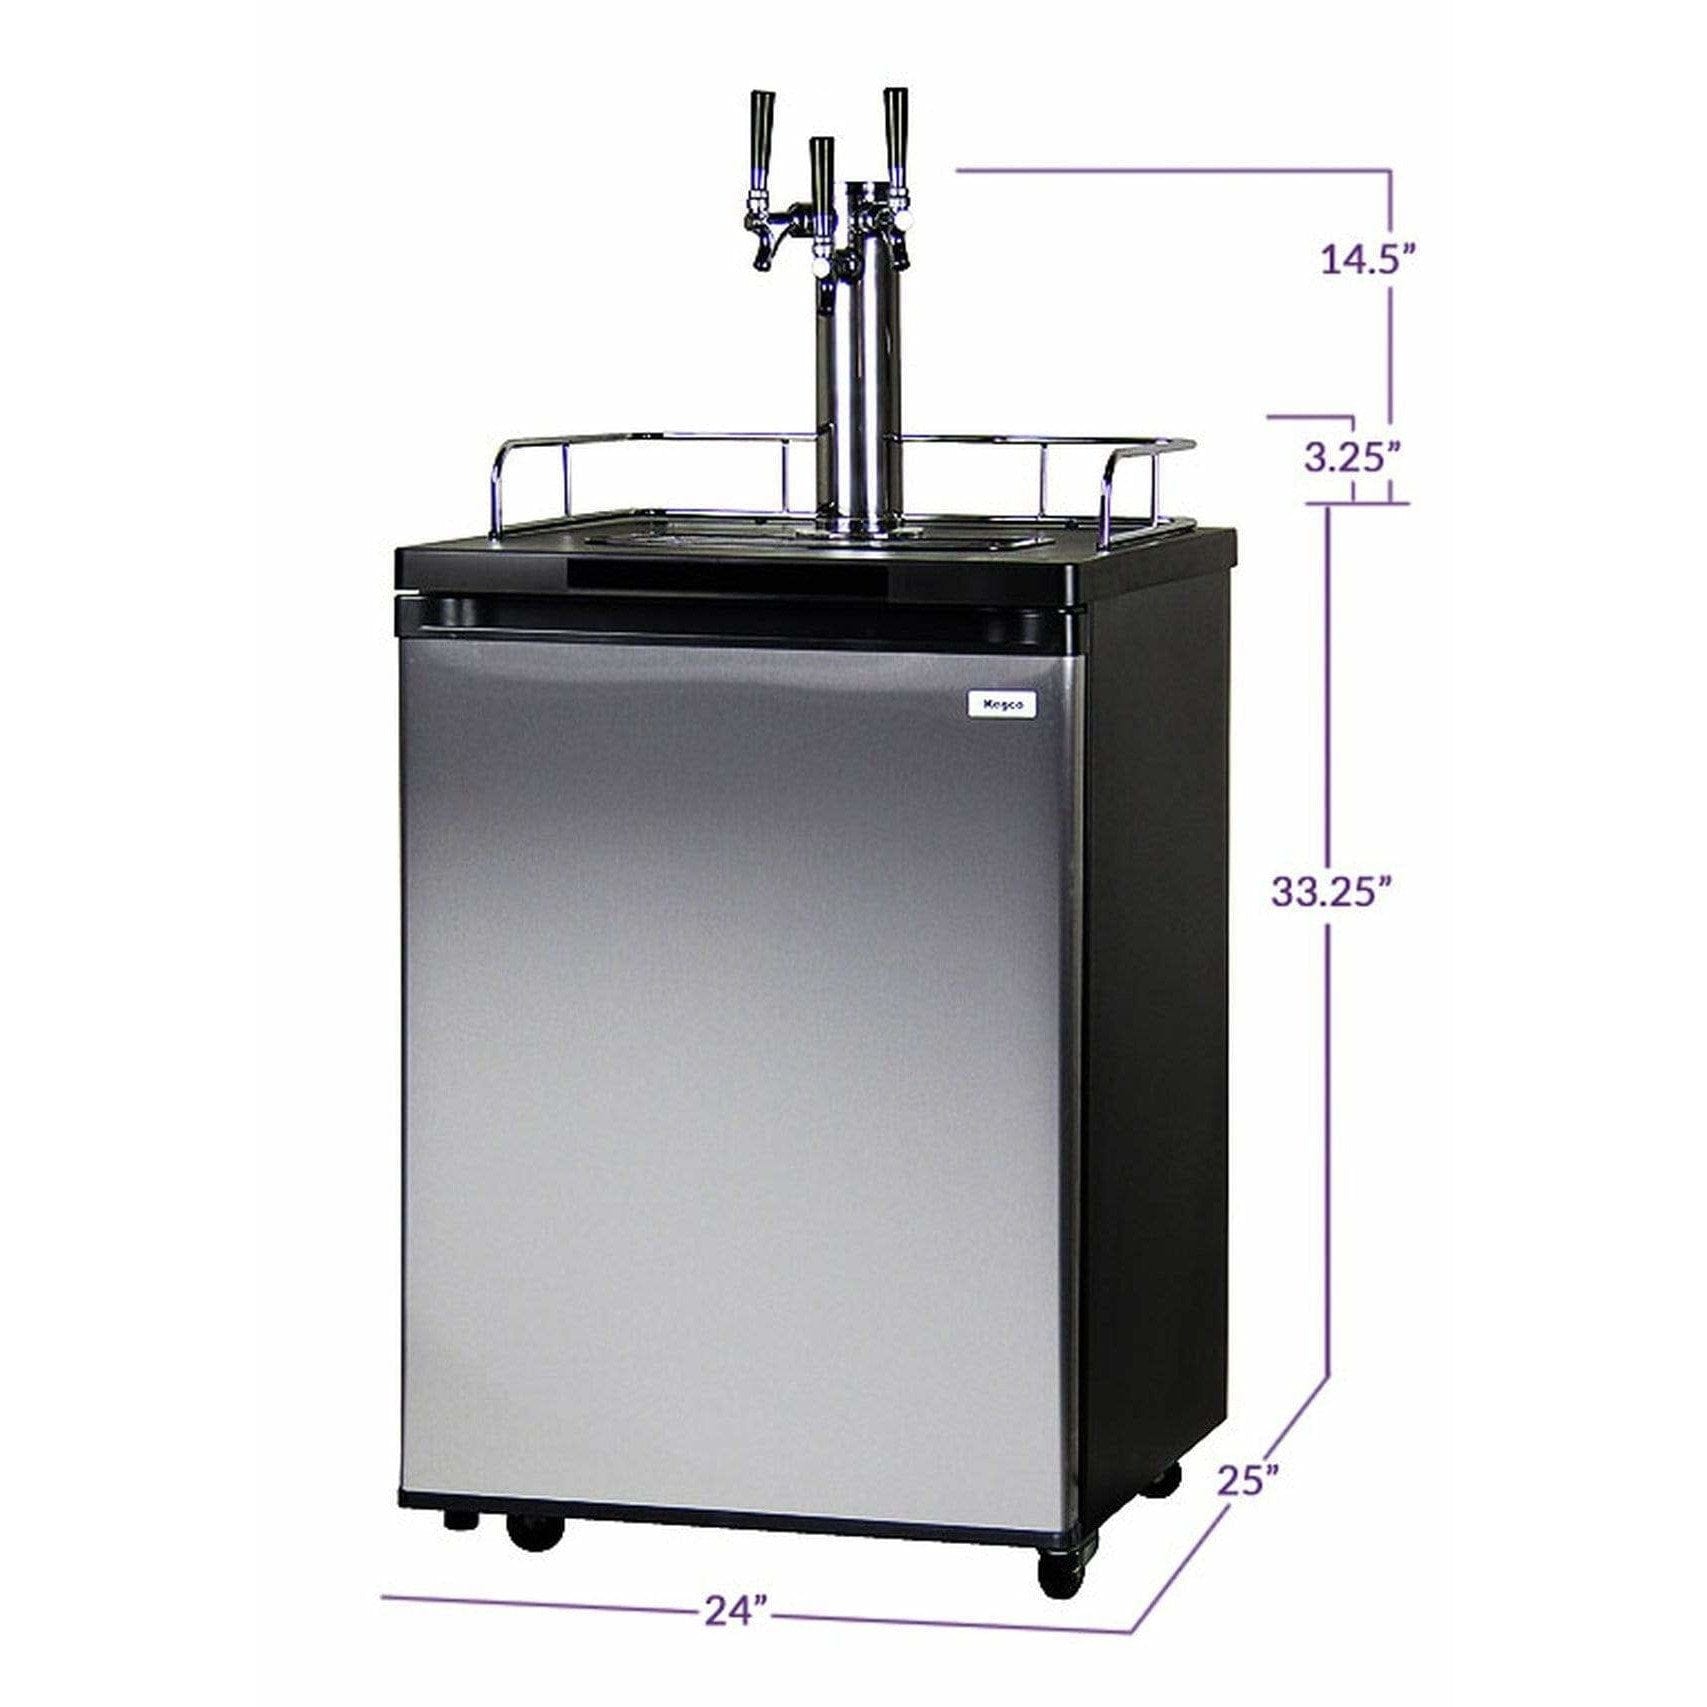 Kegco Home Brew- Black Cabinet and Stainless Steel Door Home Brew Kegerator HBK209S-3K Wine Coolers Empire